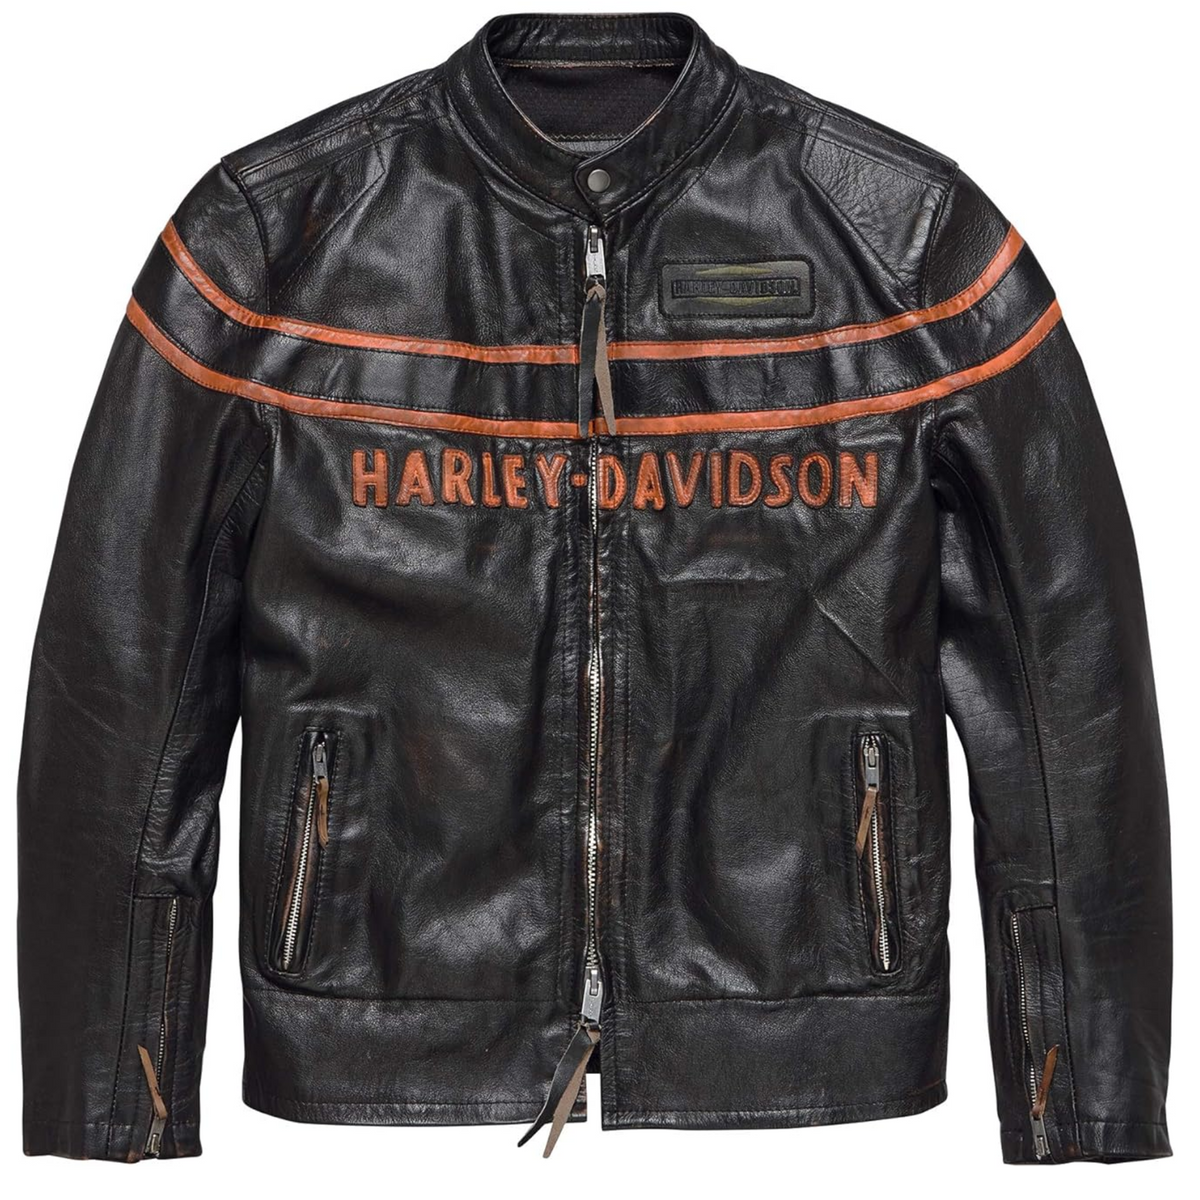 Harley-Davidson Men's Double Ton Slim Fit Leather Jacket: Fully Handmade Classic